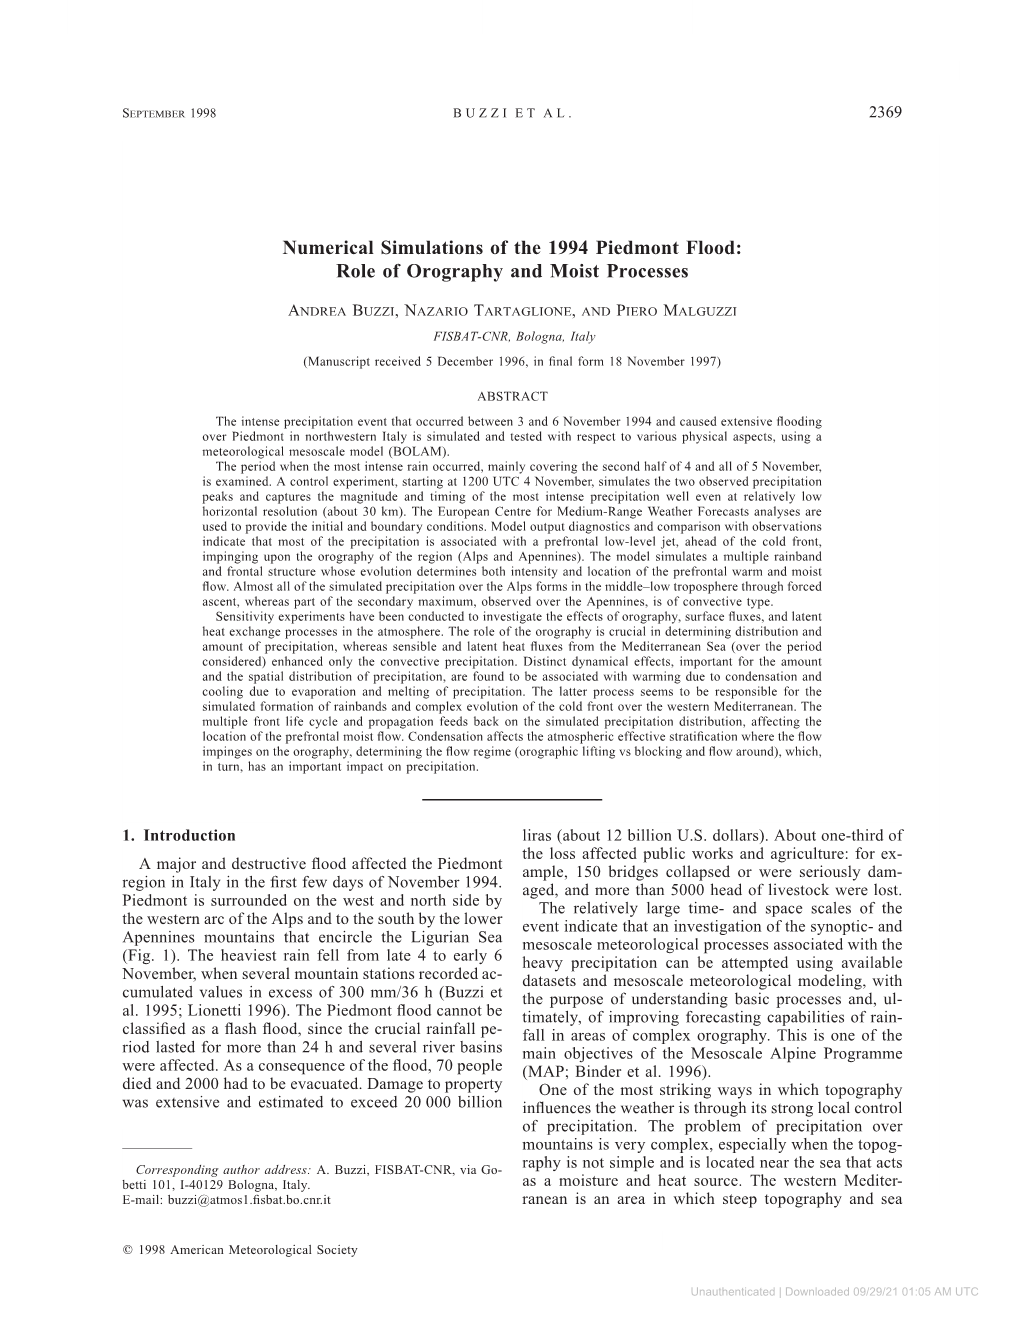 Numerical Simulations of the 1994 Piedmont Flood: Role of Orography and Moist Processes